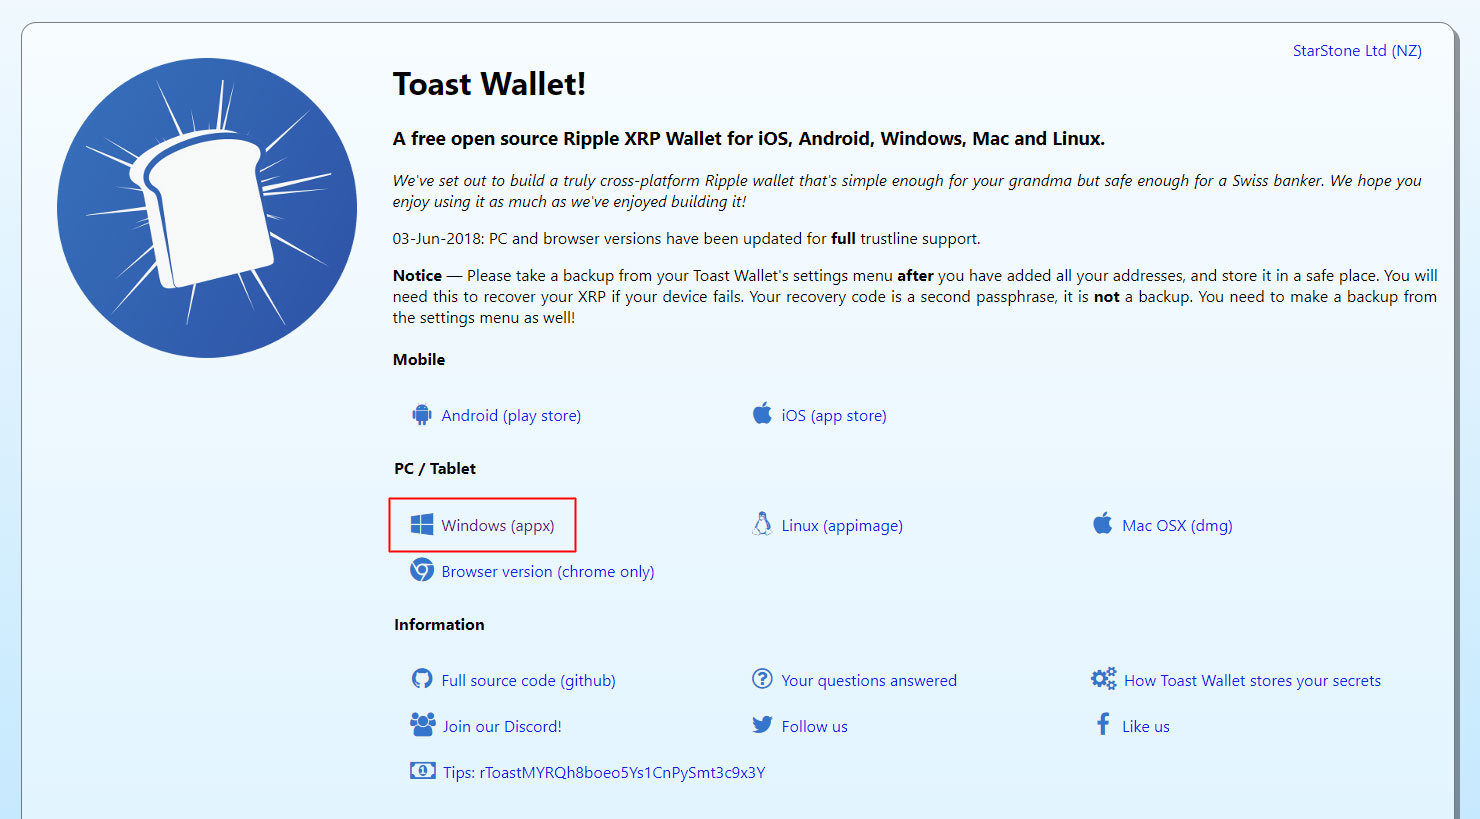 Toast Wallet Review: Is This the Best Ripple Wallet?